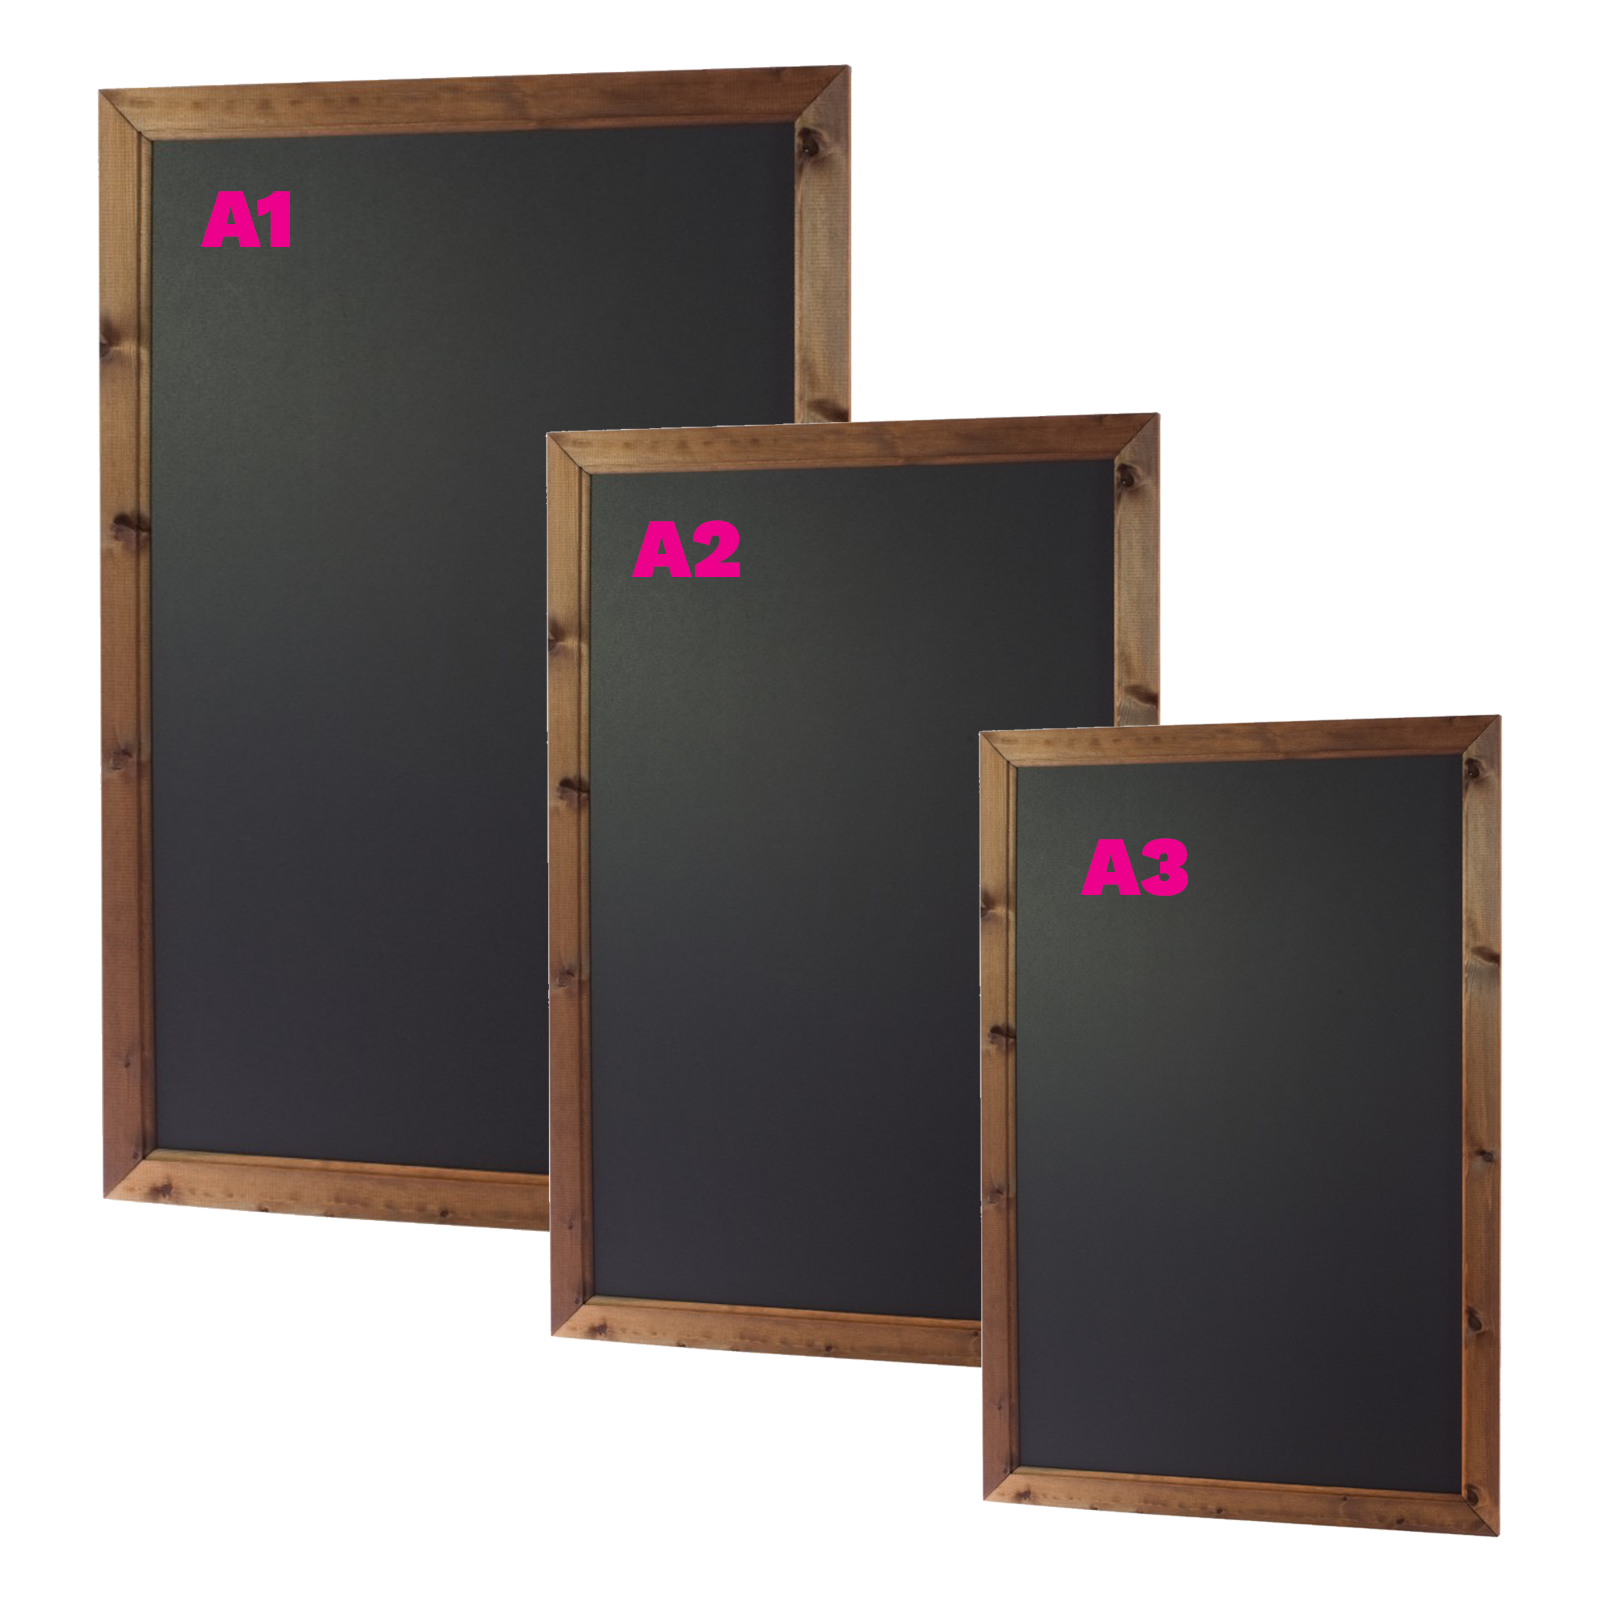 Dark Oak Wood Framed wallmounted Chalkboard. Available in A3 / A2 & A1 size. Interior & Exterior use